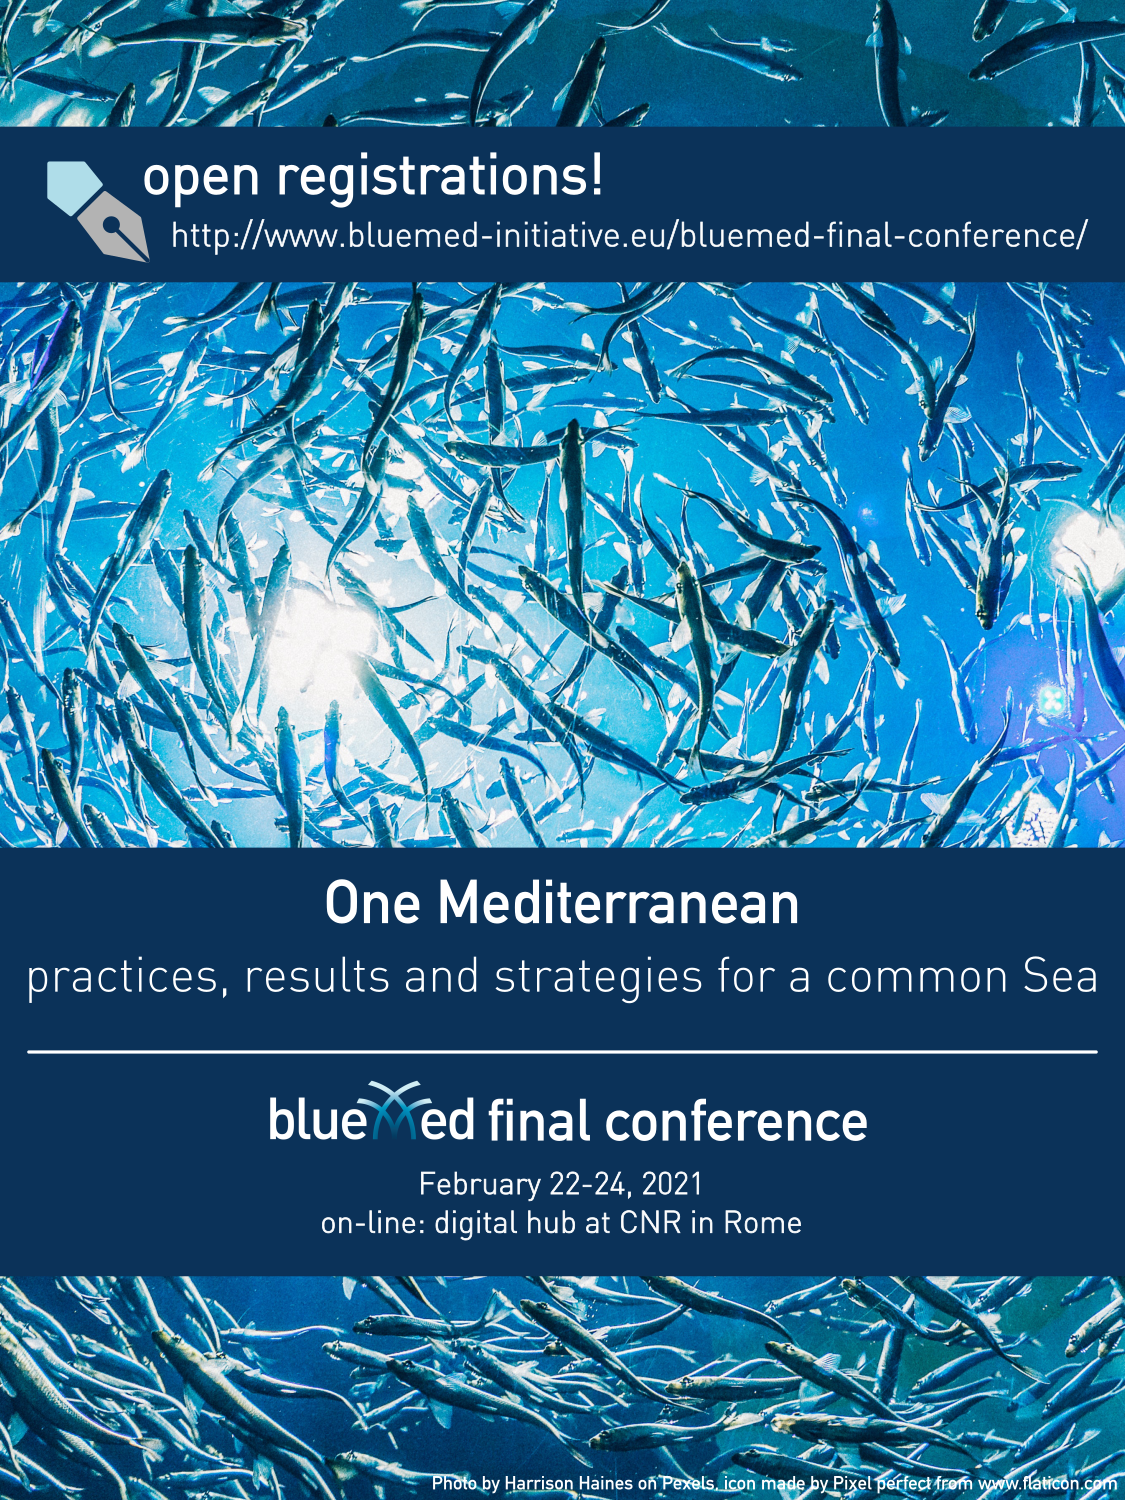 BlueMed Final Conference - "One Mediterranean: practices, results and strategies for a common Sea" 